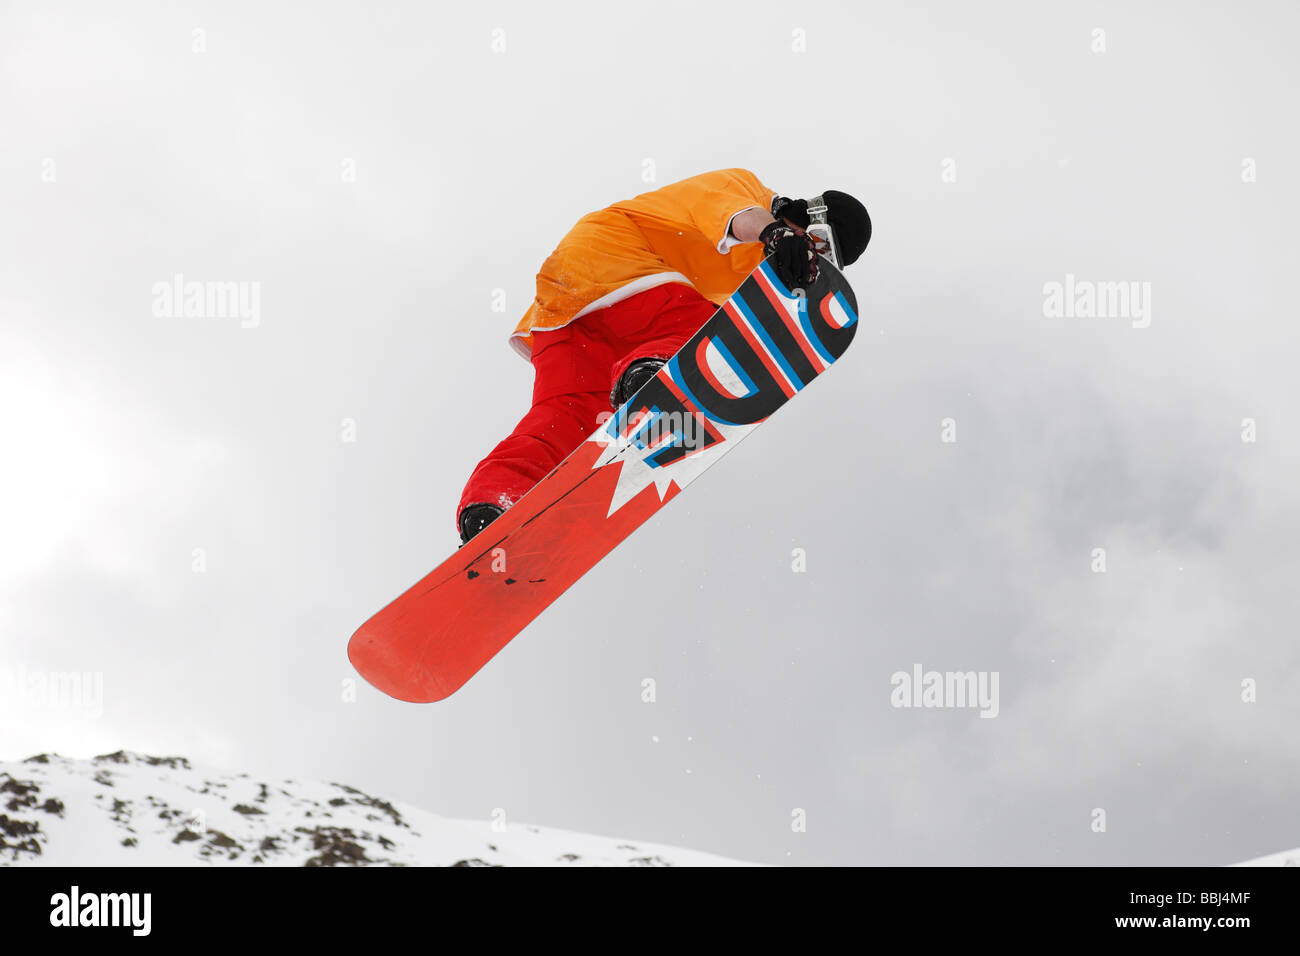 Snowboarder makes a jump in the ski resort of Les Deux Alps, (in Isère), part of the Grande Galaxie Ski Area, The Alps, France Stock Photo